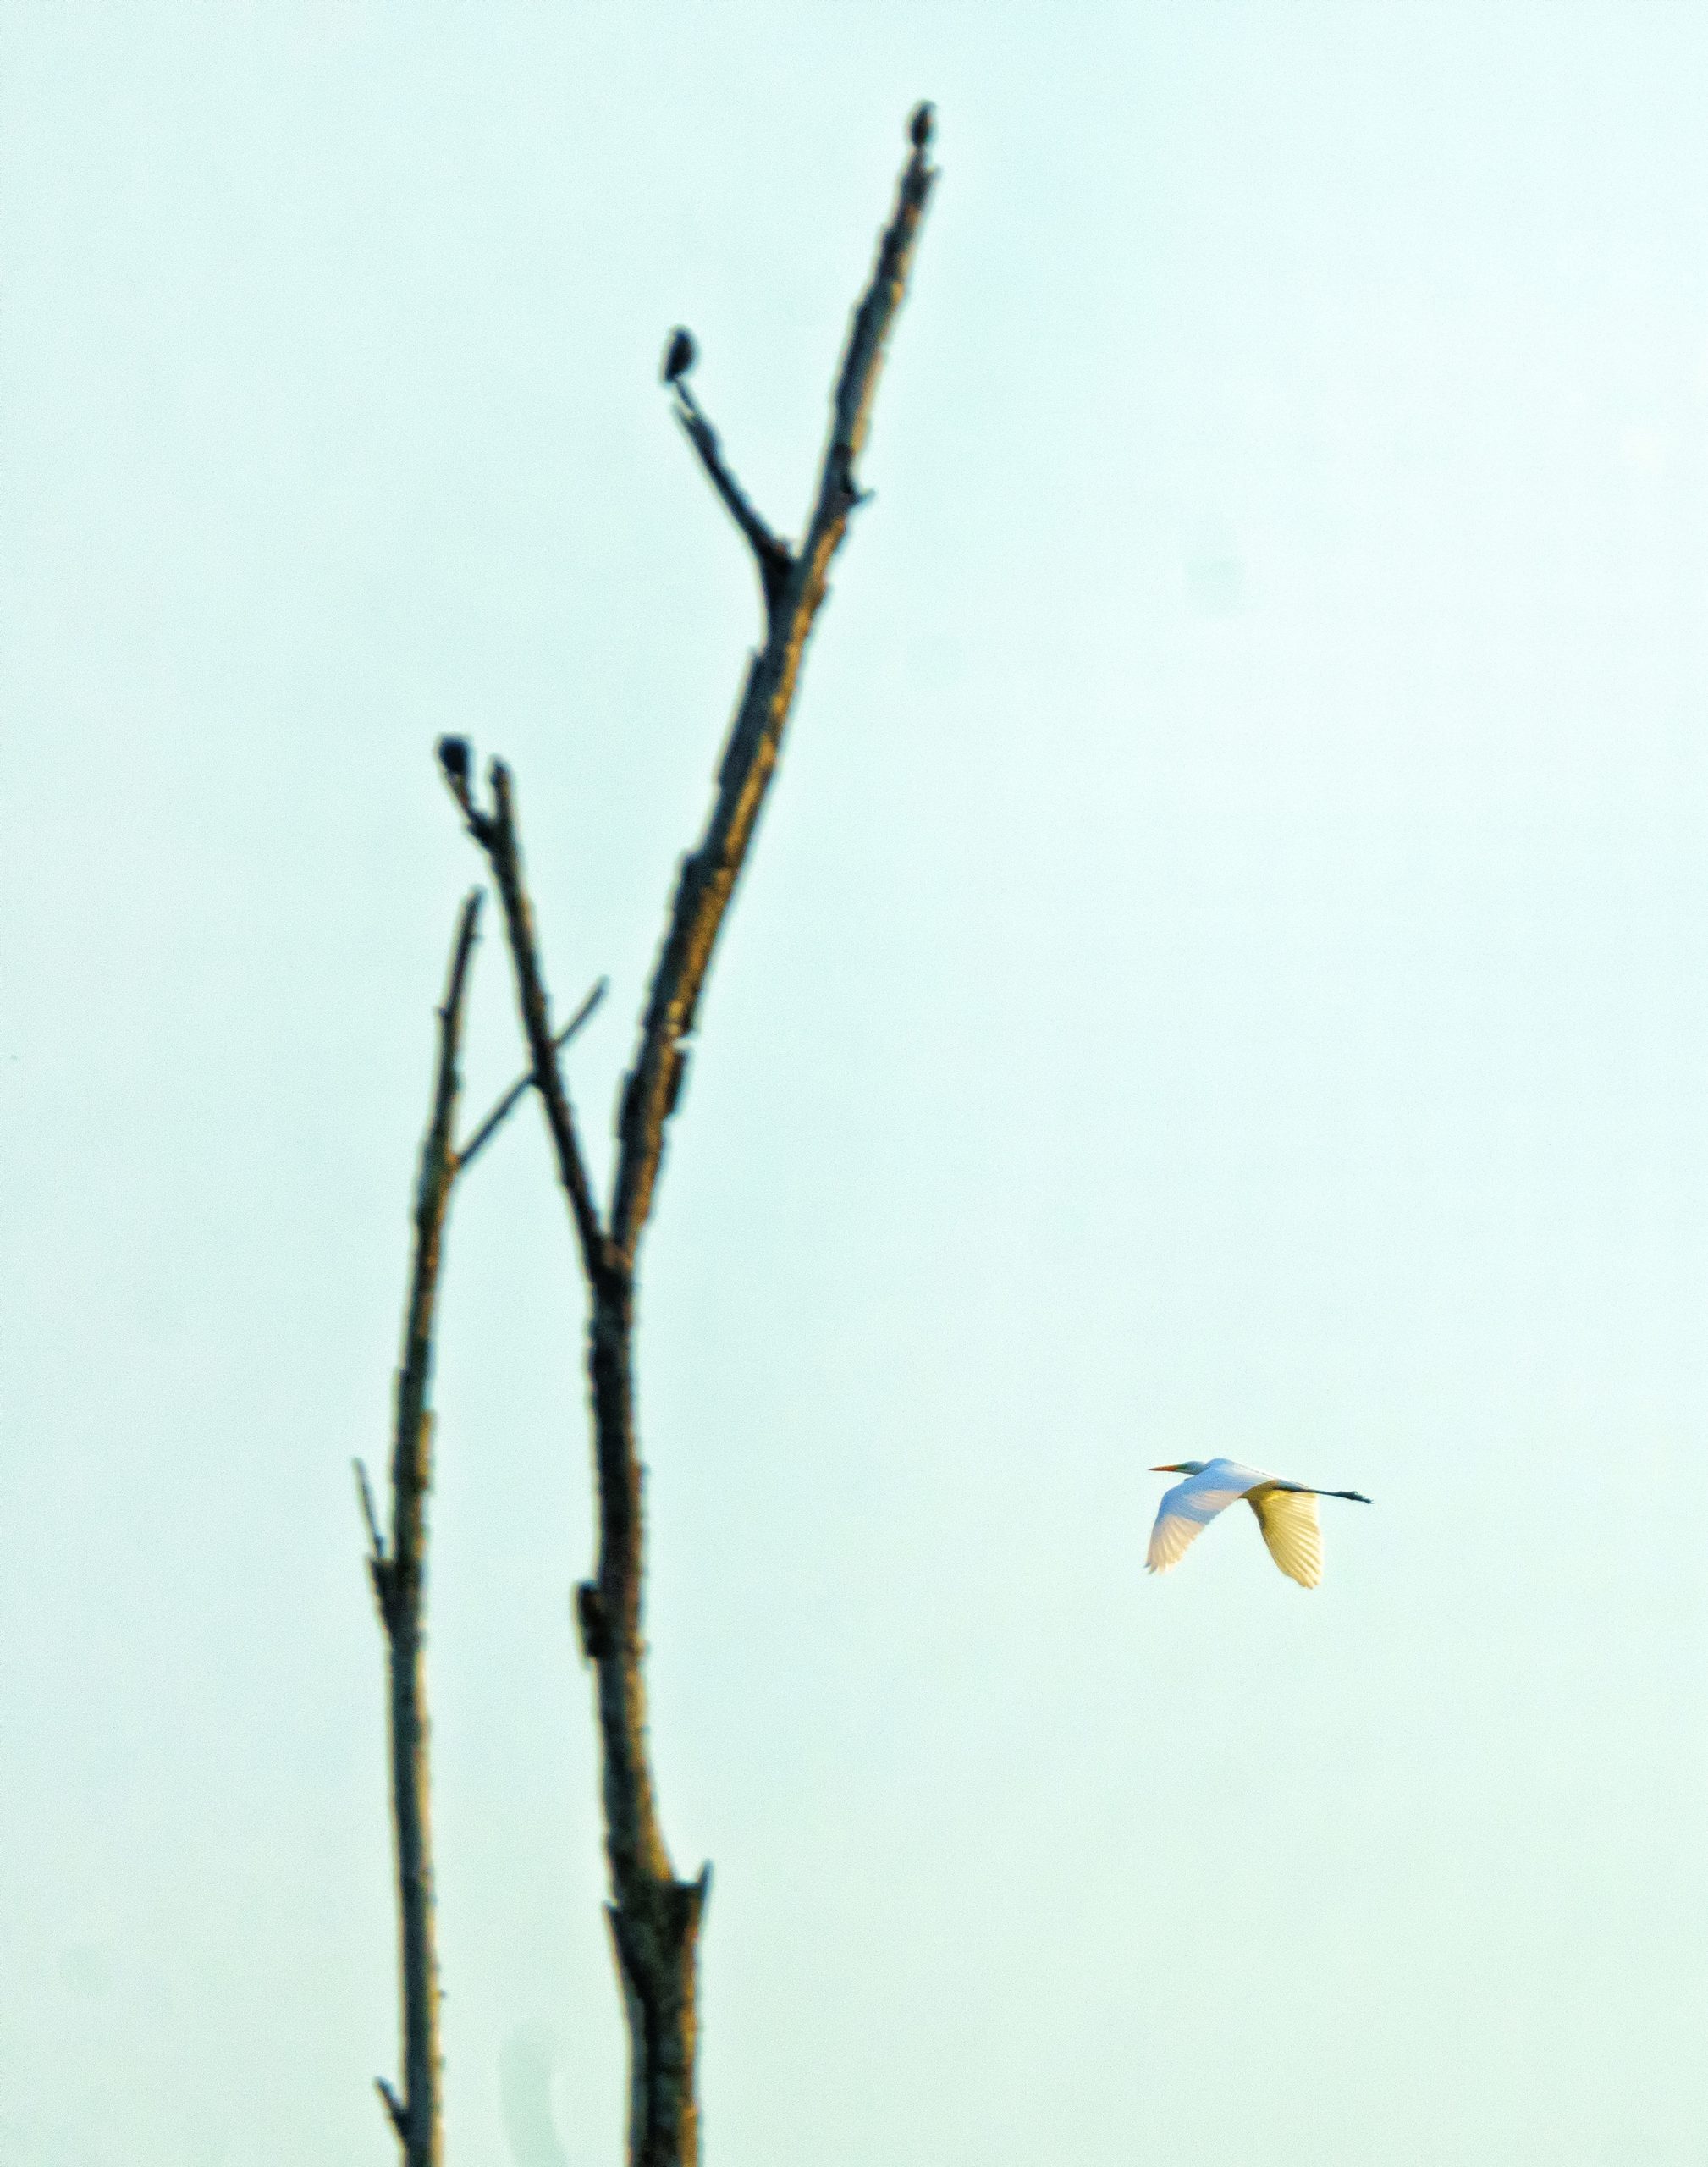 A large white bird flies right to left. An out-of-focus tree is to the left of the frame.